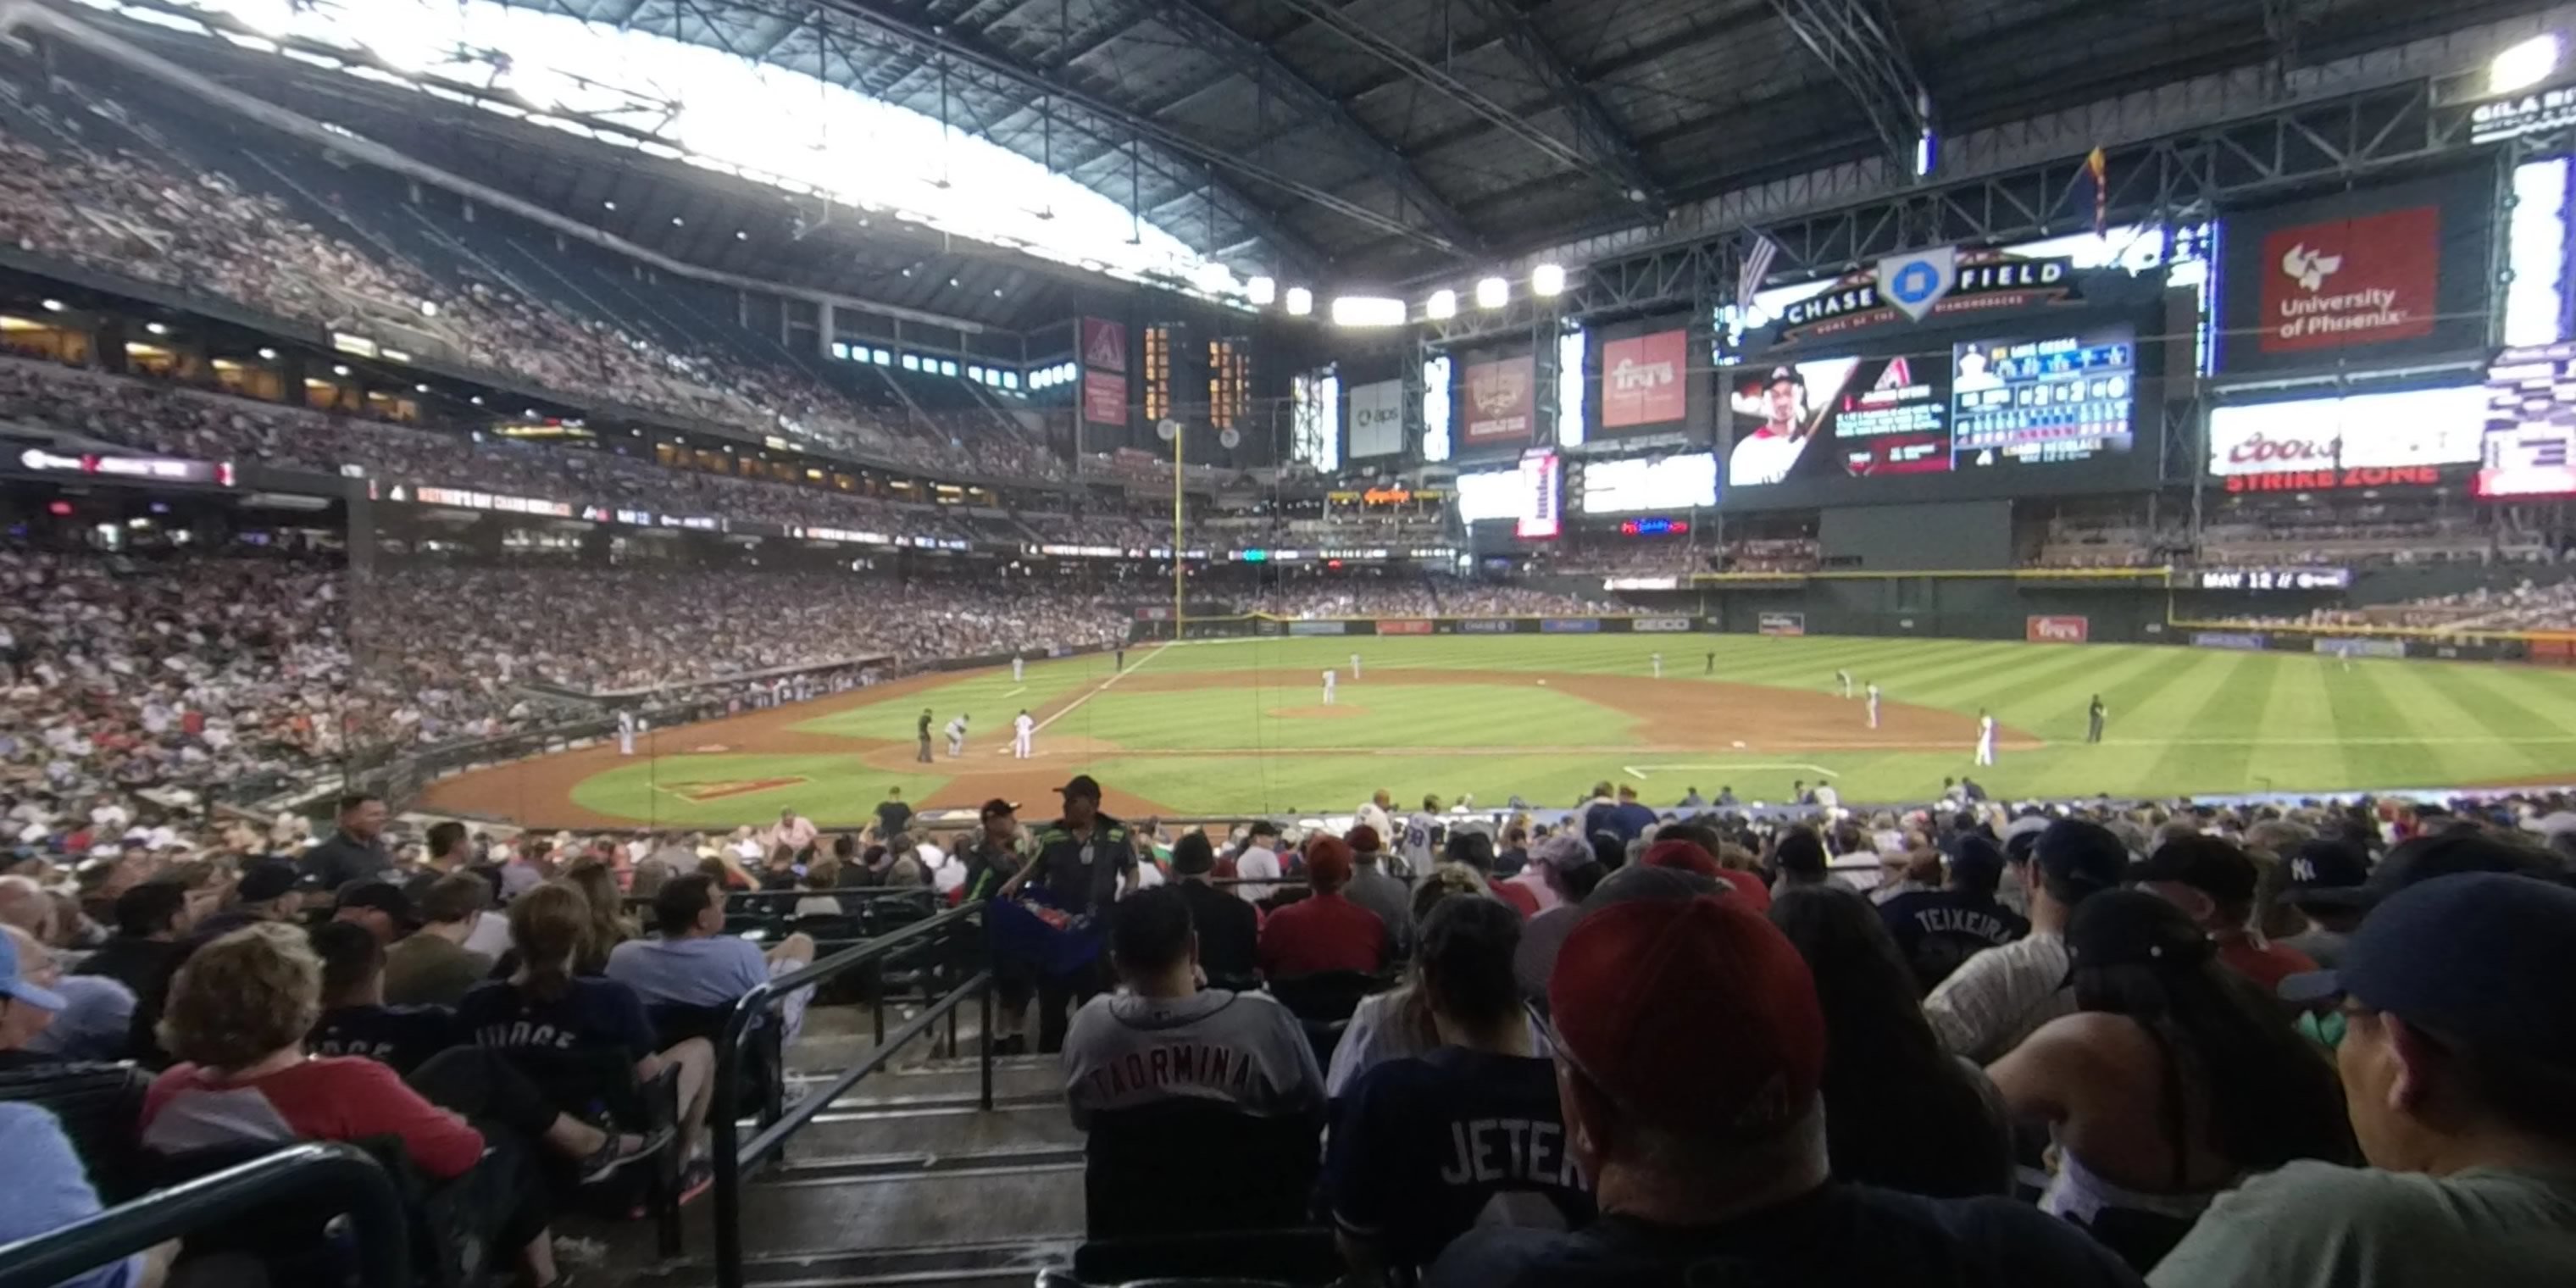 section 117 panoramic seat view  for baseball - chase field